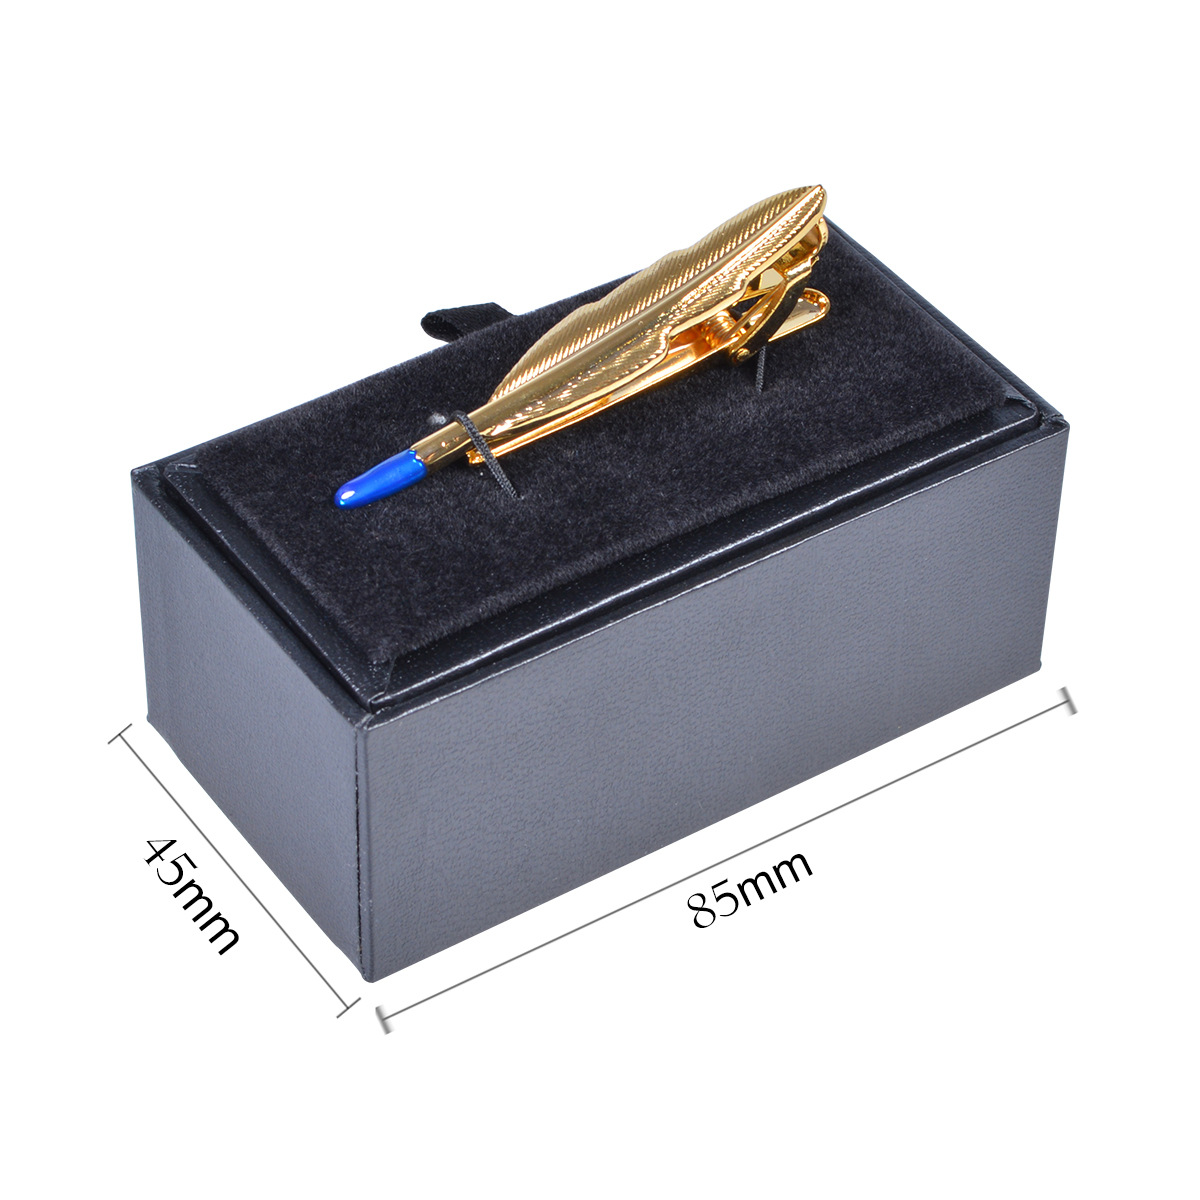 9:High quality tie clip box (without display)